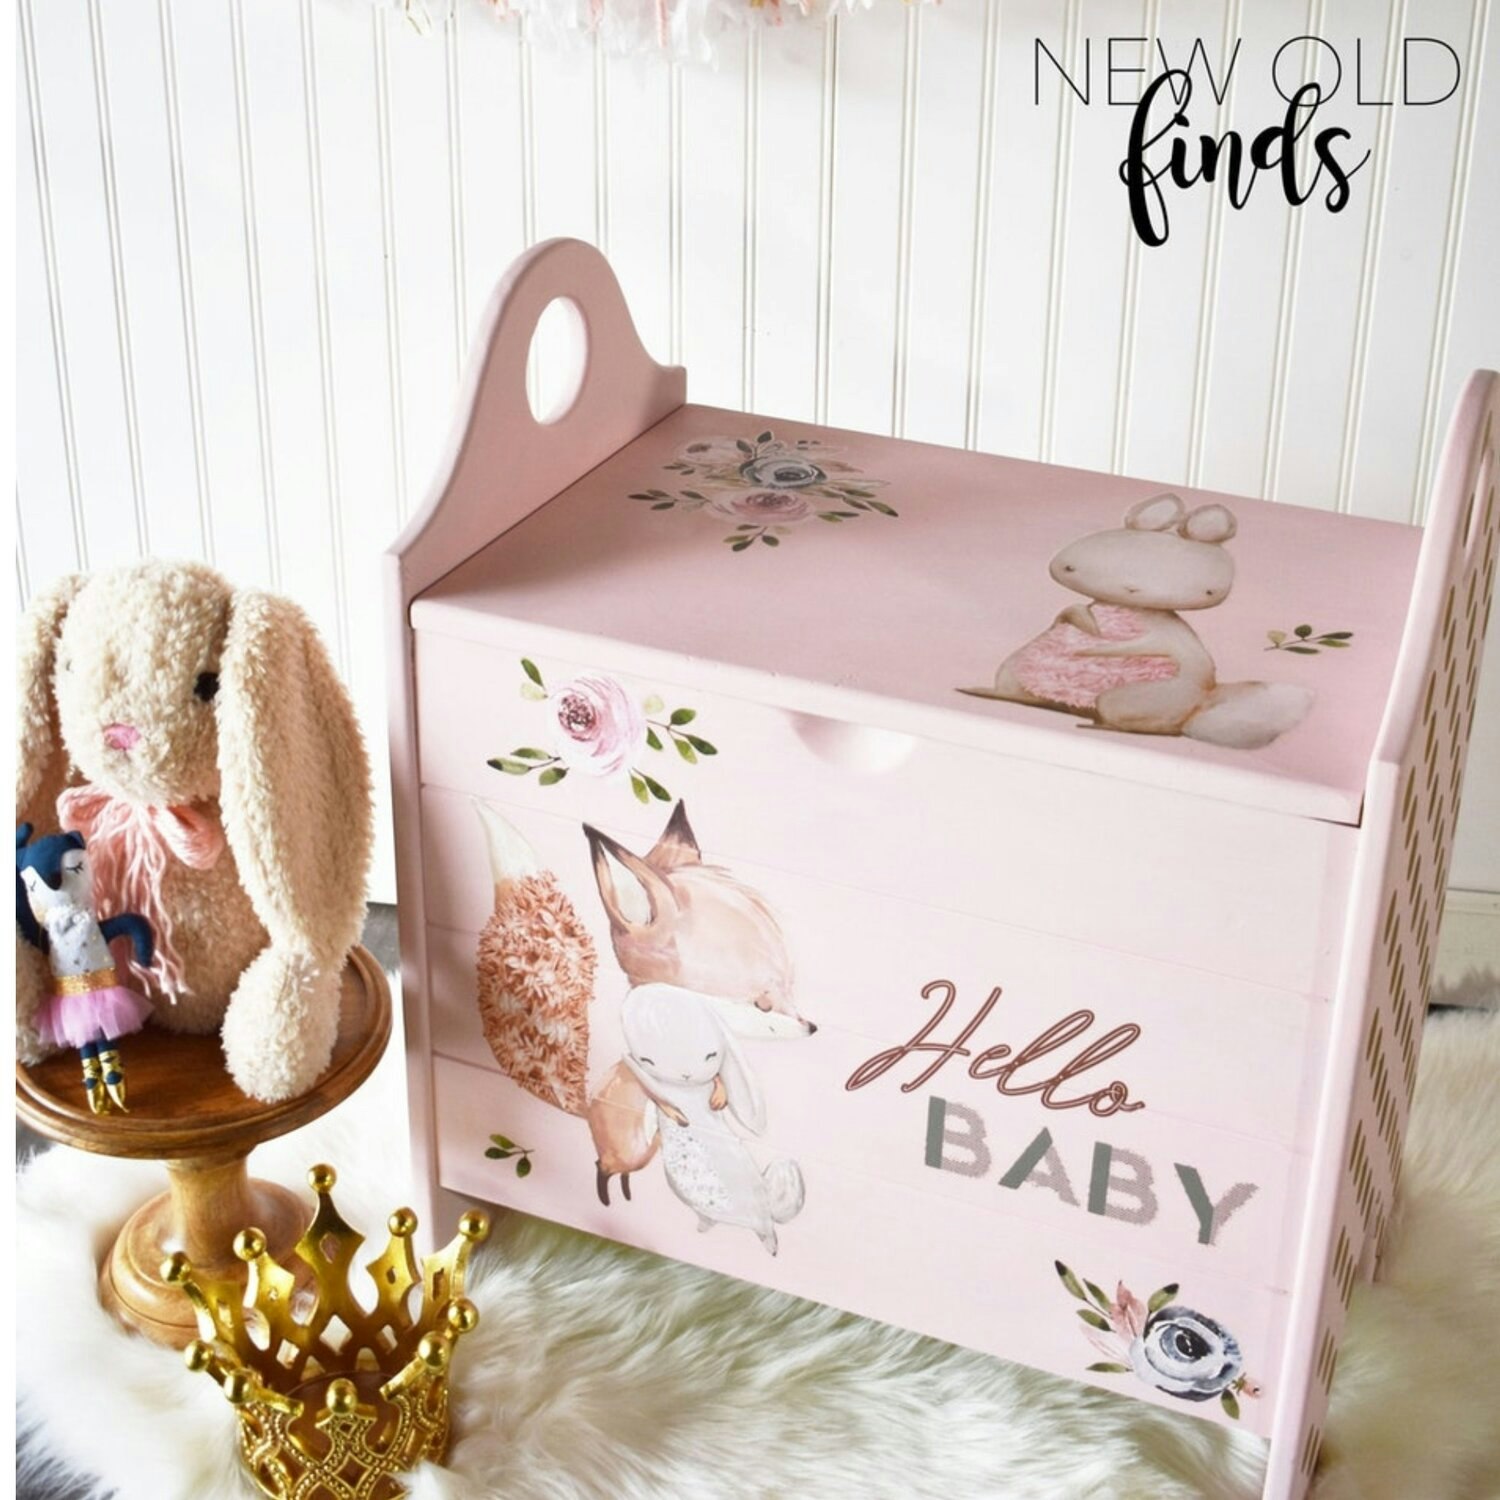 TRANSFER - Re Design Décor Transfers - Hello Baby - Photo credit @NewOldFinds